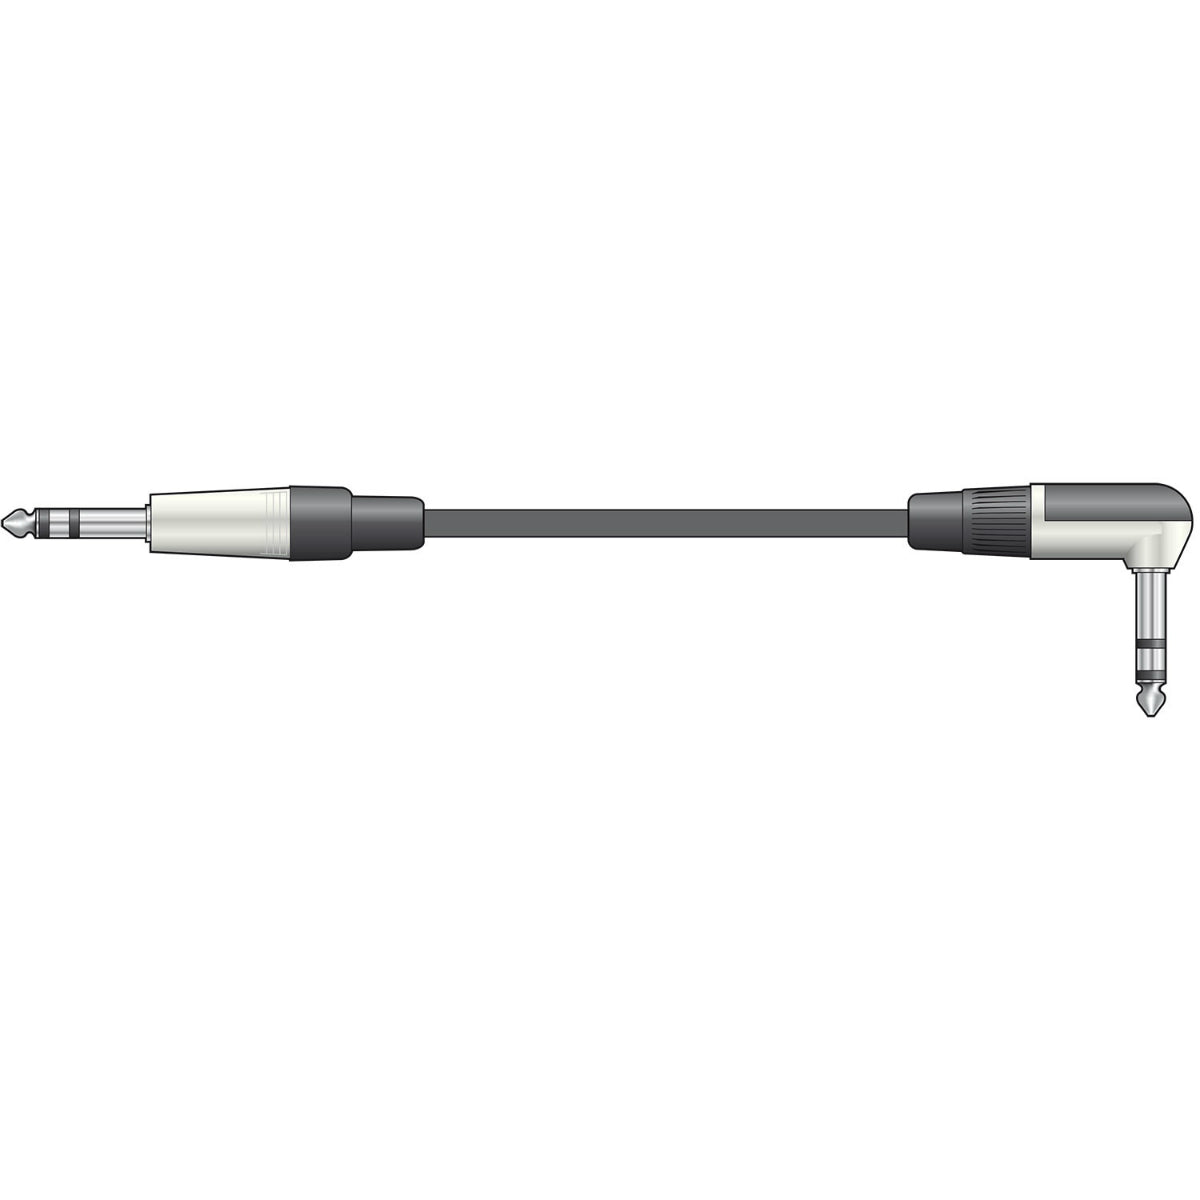 Chord 3m 6.3 TRS Right-Angle Jack To Straight Jack Lead (190271)